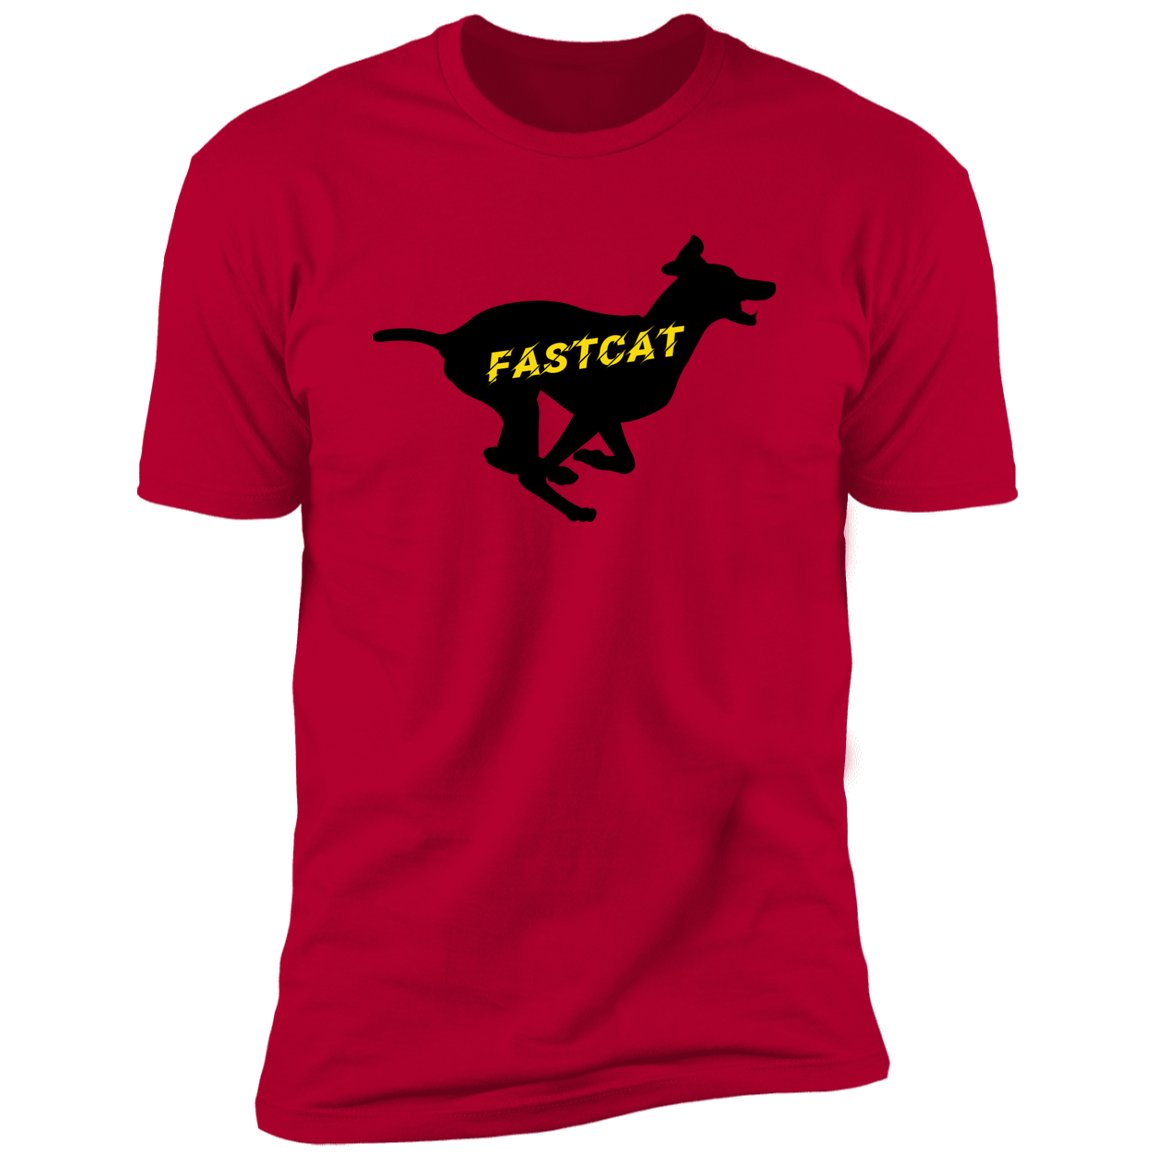 FastCAT Dog T-shirt, sporting dog t-shirt for humans, FastCAT t-shirt, in red